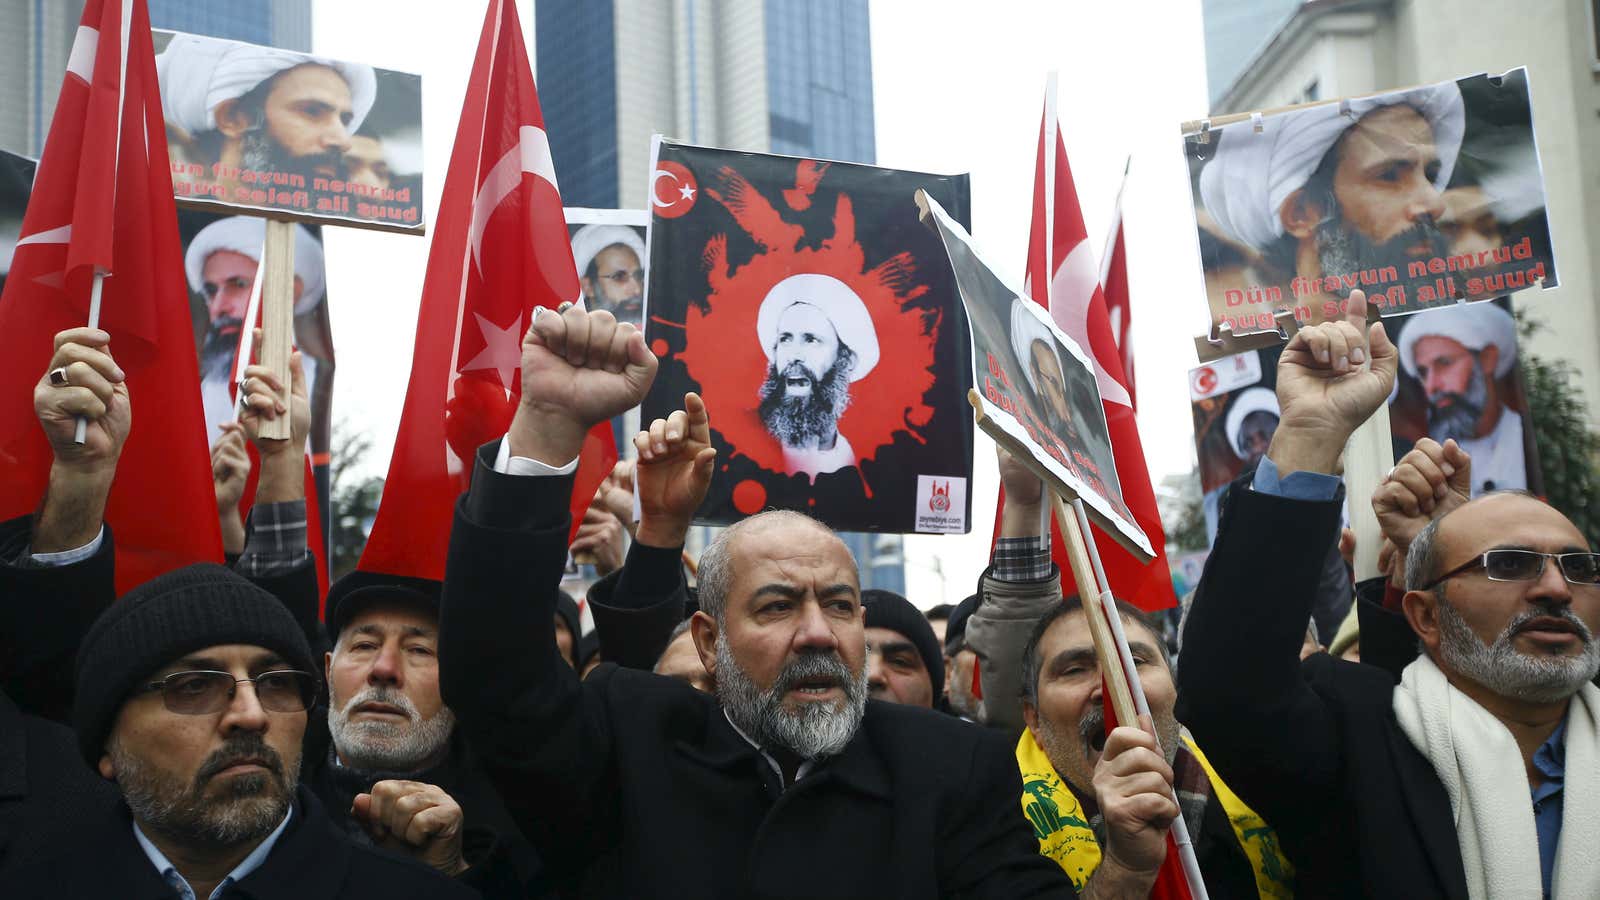 The execution of Sheikh Nimr al-Nimr has led to protests across the Middle East.